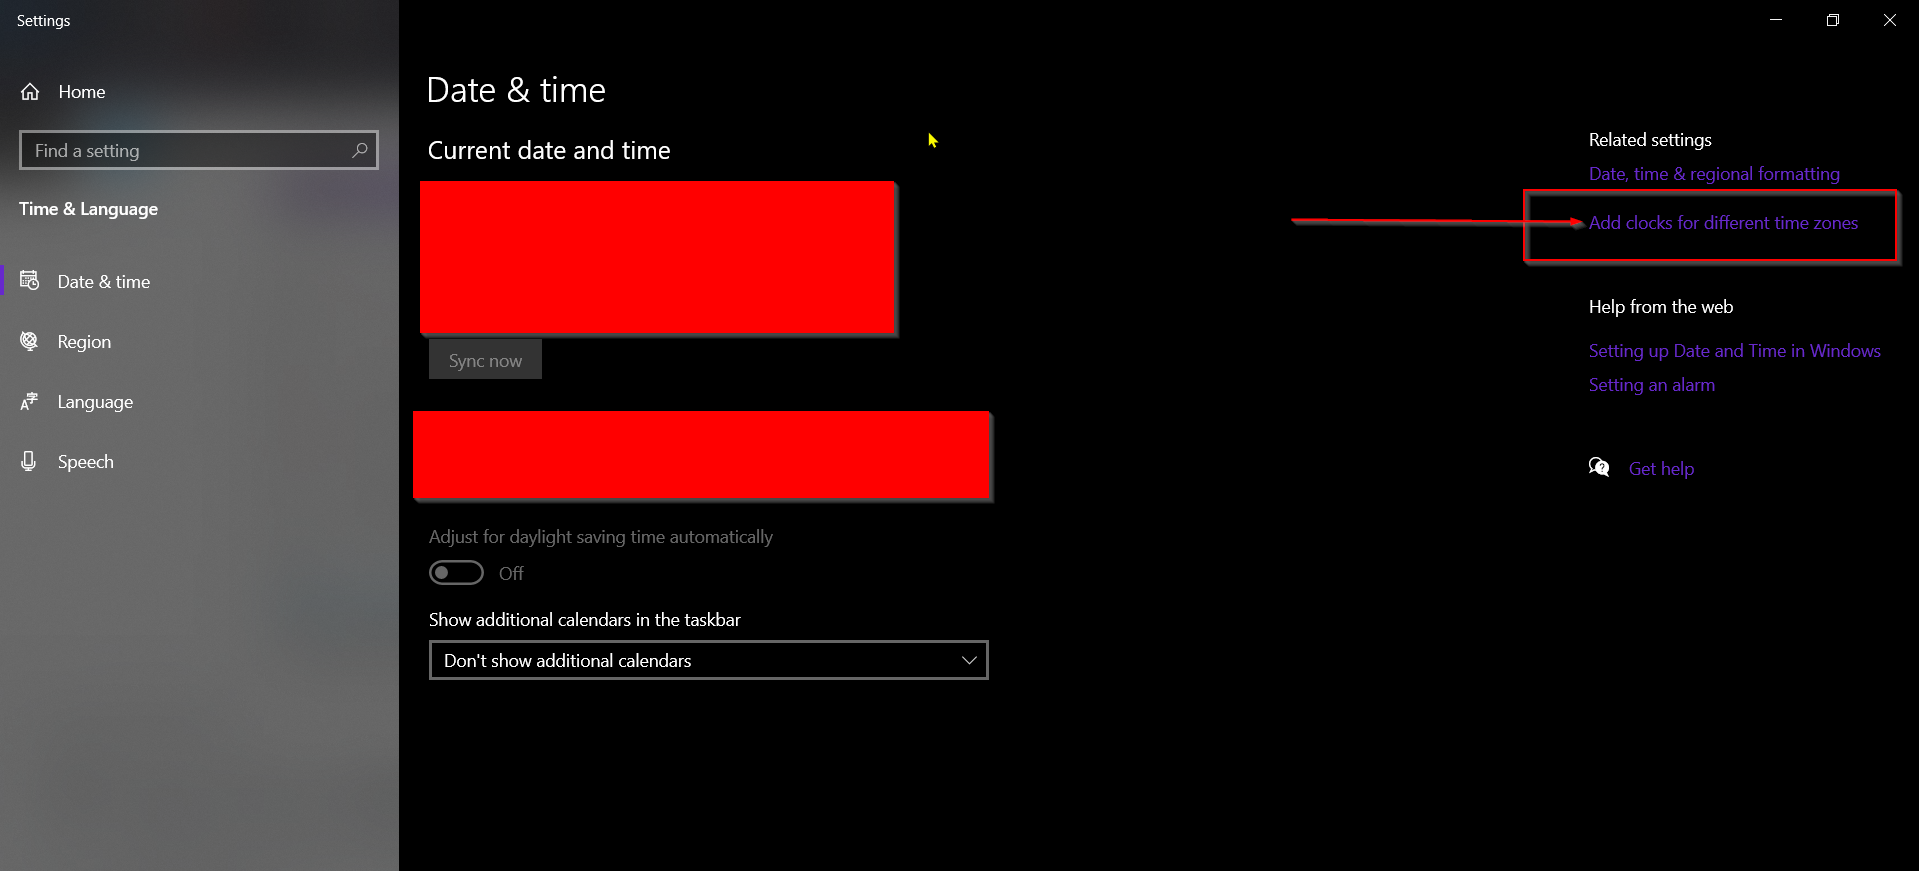 How to add a second clock for another time zone in Windows 11 OS